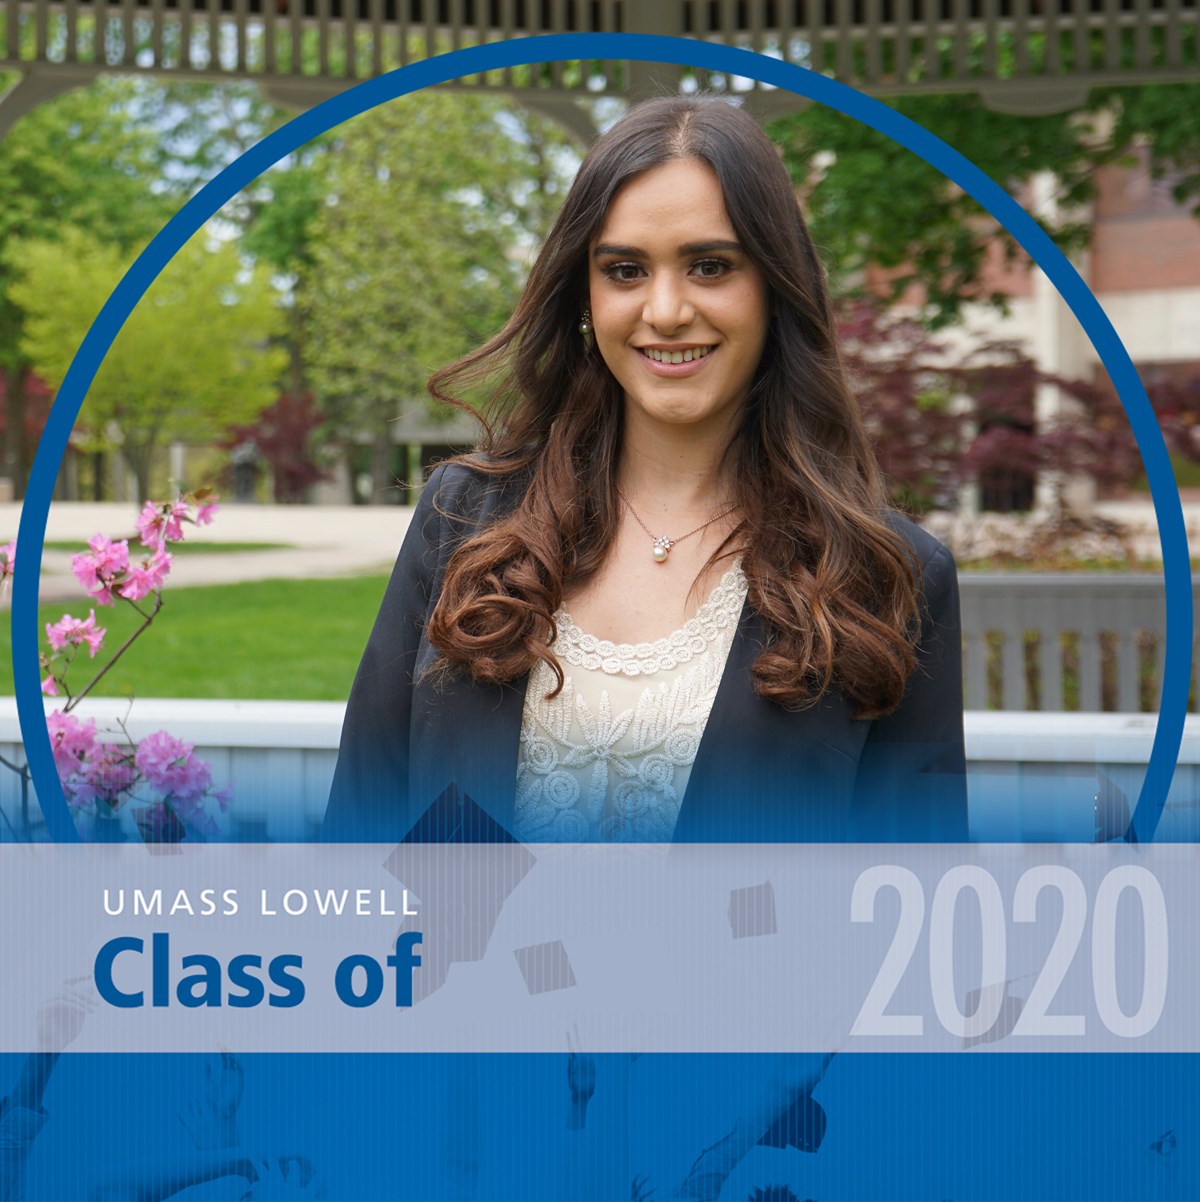 Headshot of Andrea Patino Galindo on South Campus with a blue decorative frame around it that reads "UMass Lowell Class of 2020."